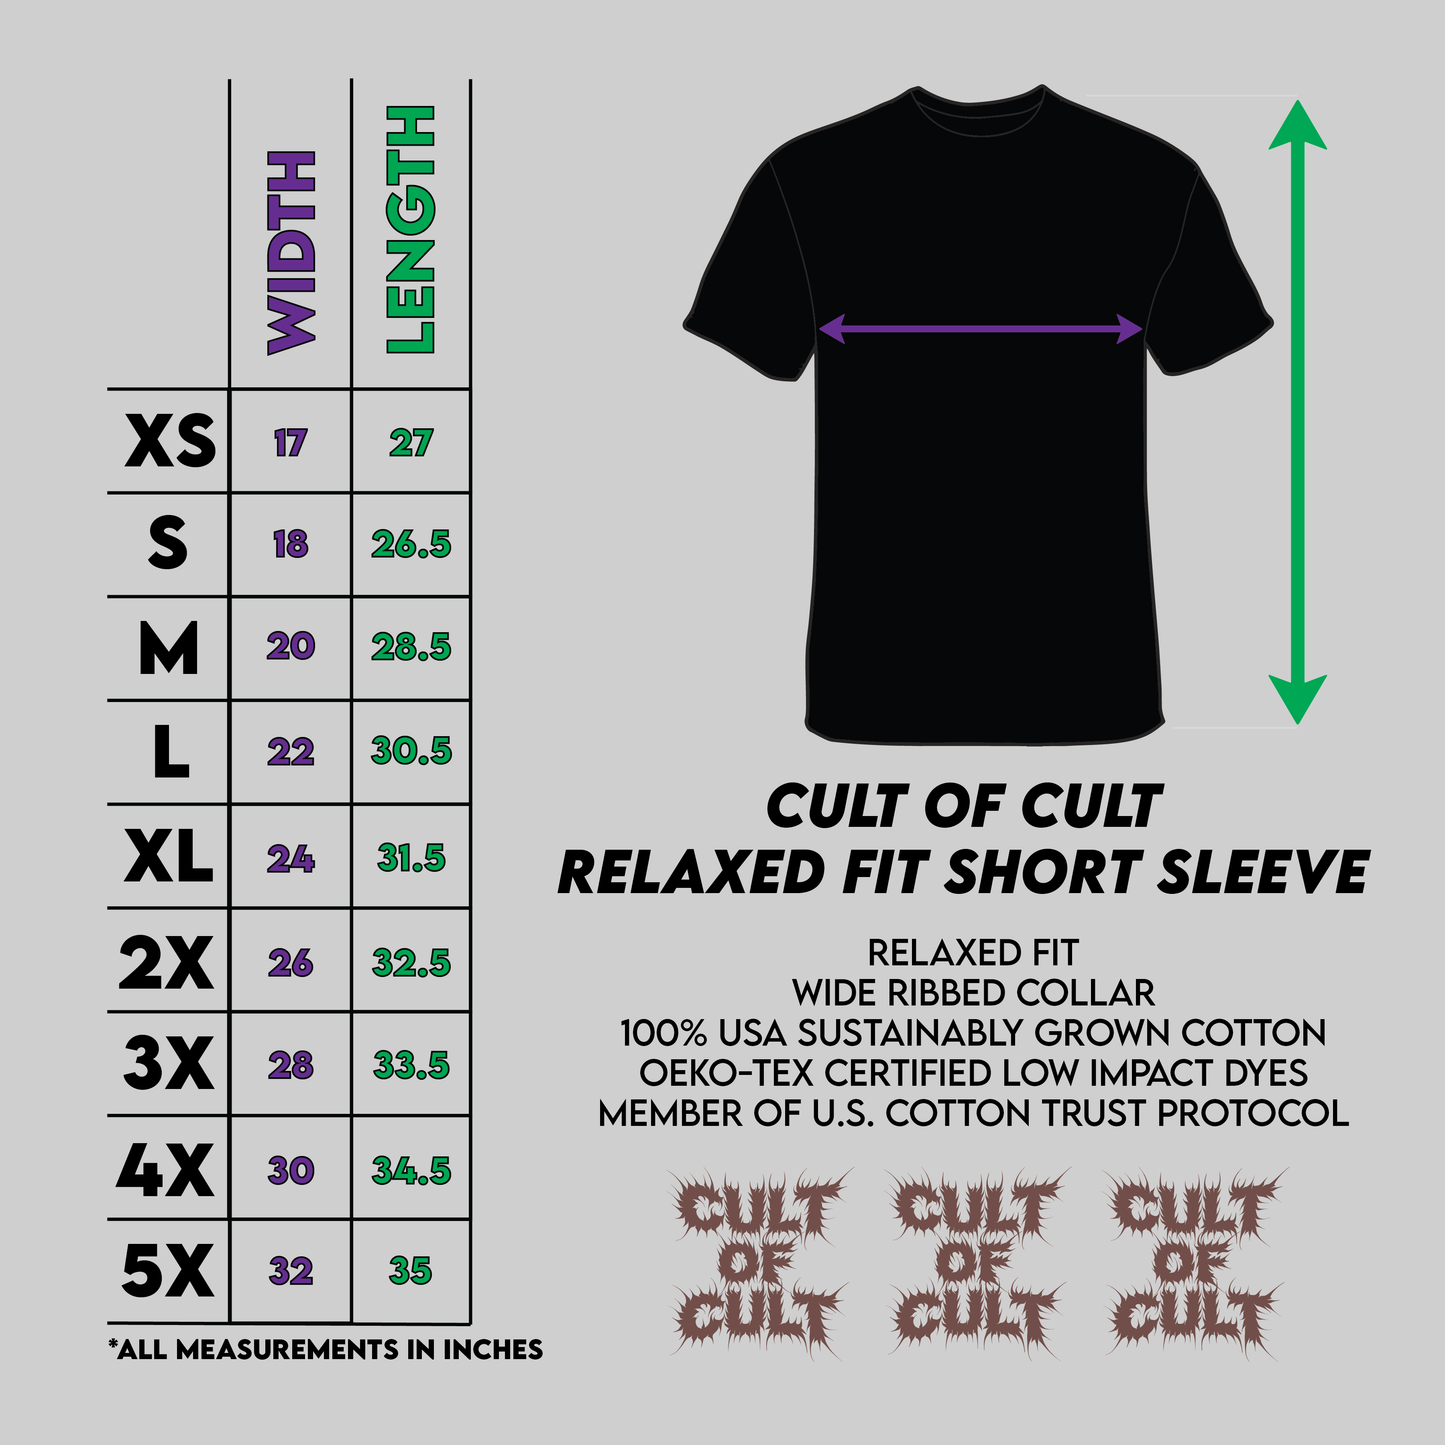 Cult of Cult Ask For Helen T-Shirt